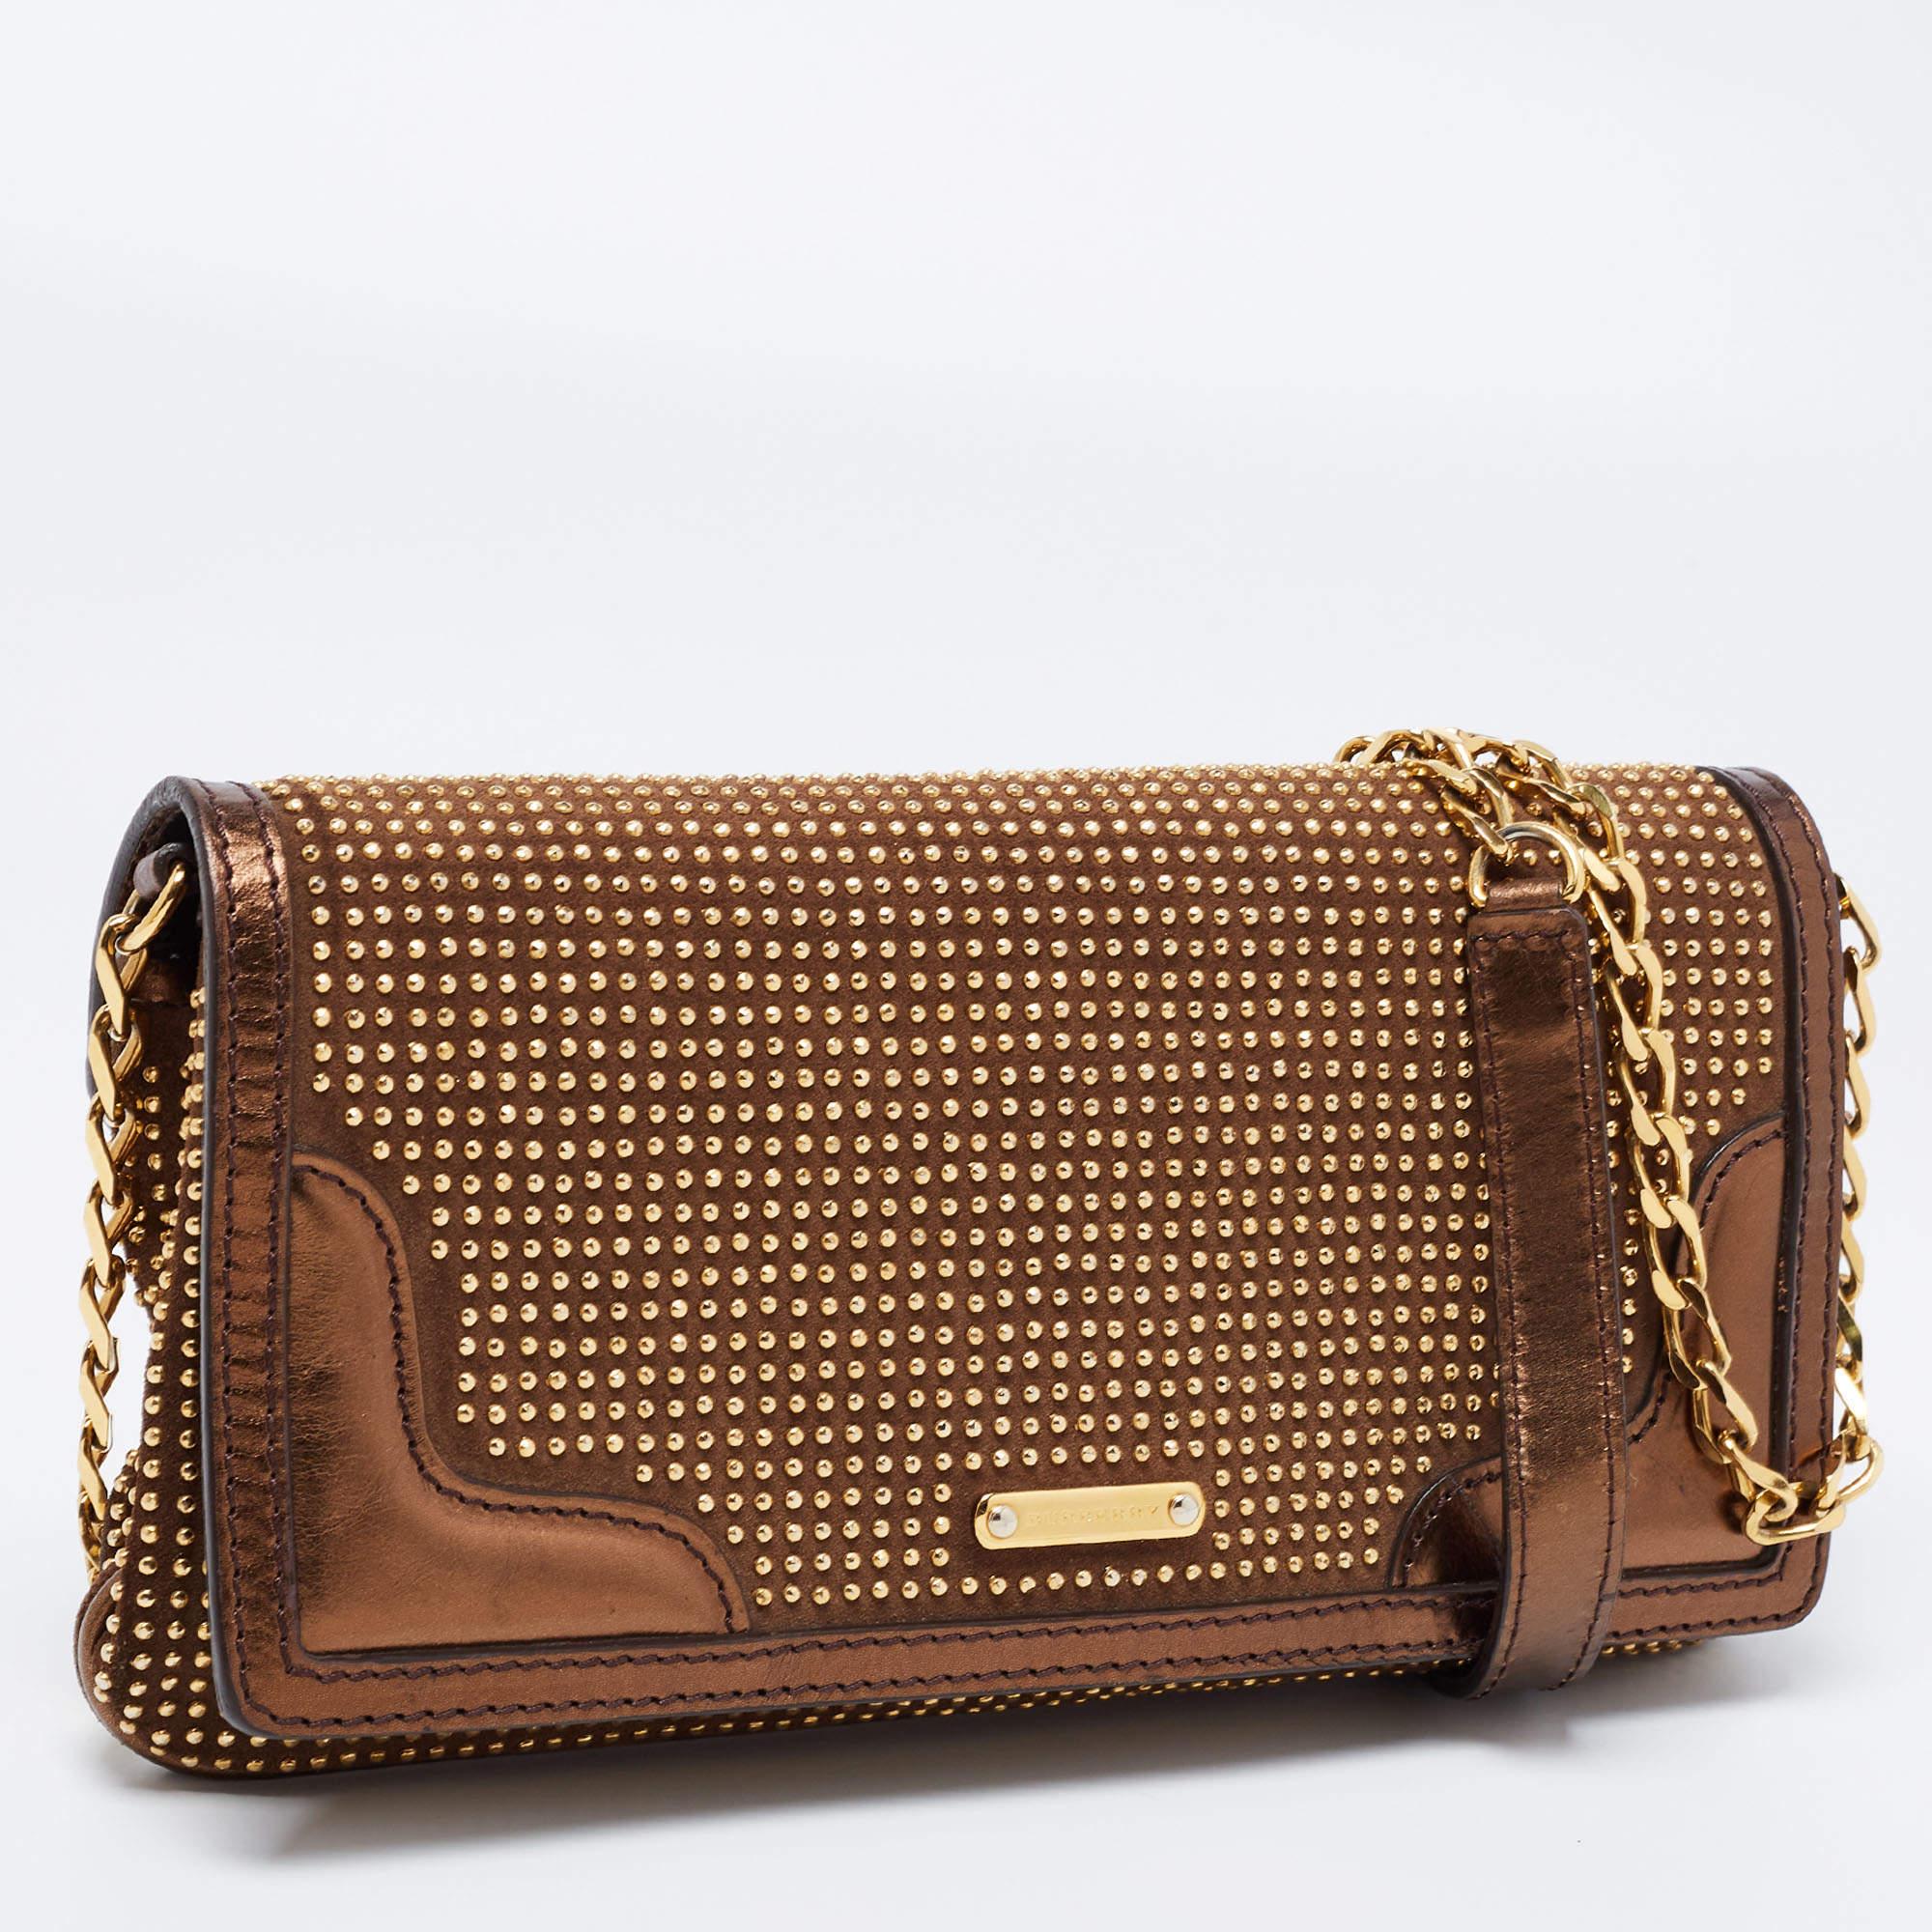 Gorgeous and functional, this shoulder bag from Burberry is the perfect companion for days when you want to look chic! It is designed using brown and metallic-bronze studded patent leather and suede. It flaunts a sturdy strap, gold-tone hardware,